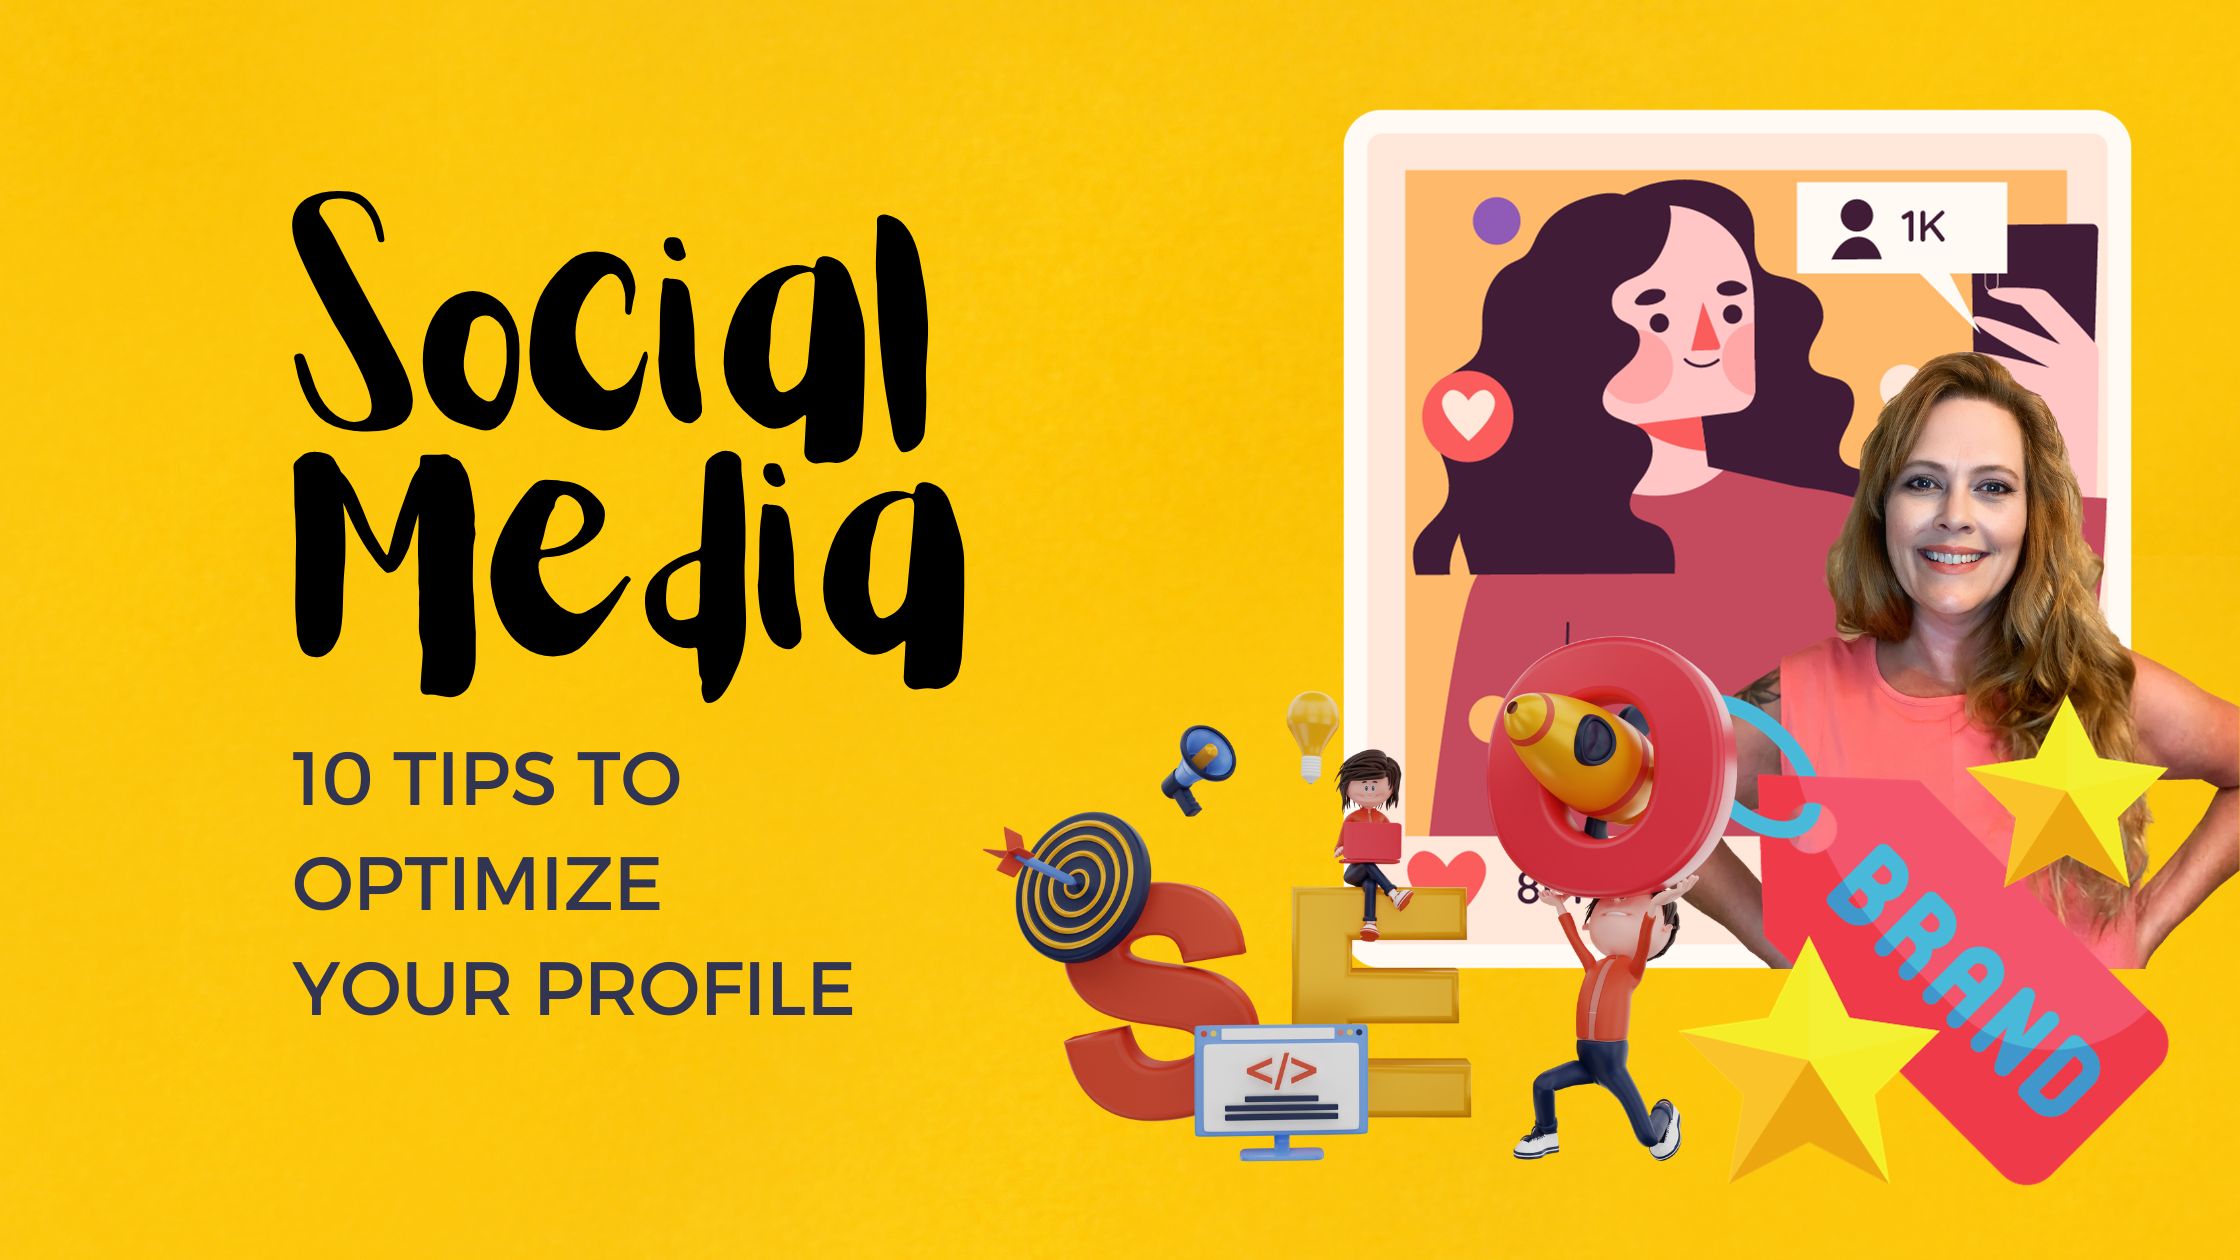 Explains these are tips for optimizing social media profiles